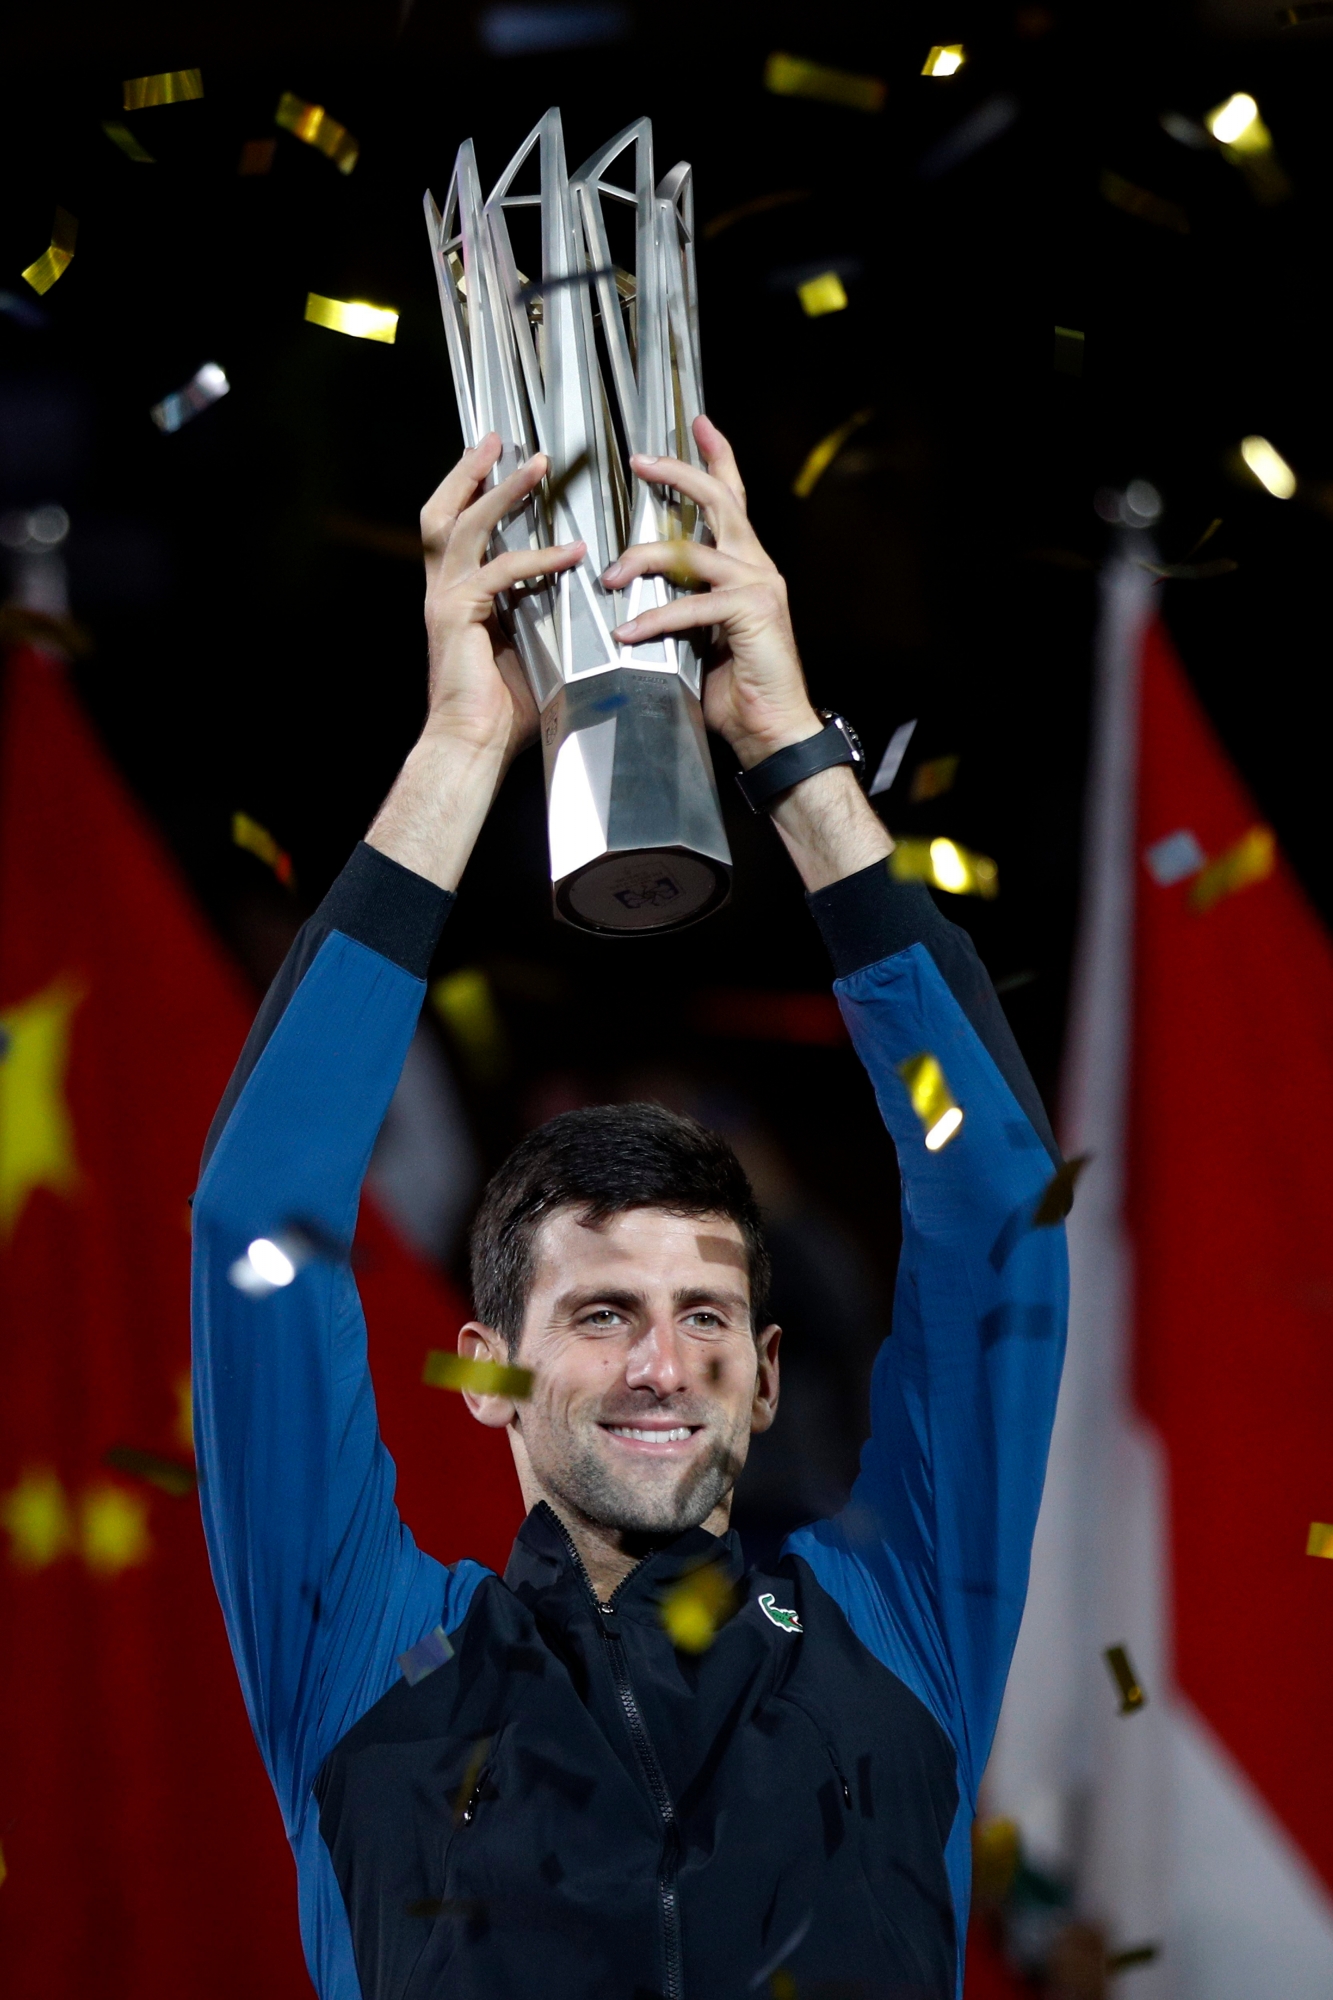 Novak Djokovic of Serbia holds up his trophy after defeating Borna Coric of Croatia in their men's singles final match to win the Shanghai Masters tennis tournament at Qizhong Forest Sports City Tennis Center in Shanghai, China, Sunday, Oct. 14, 2018. (AP Photo/Andy Wong) China Tennis Shanghai Masters